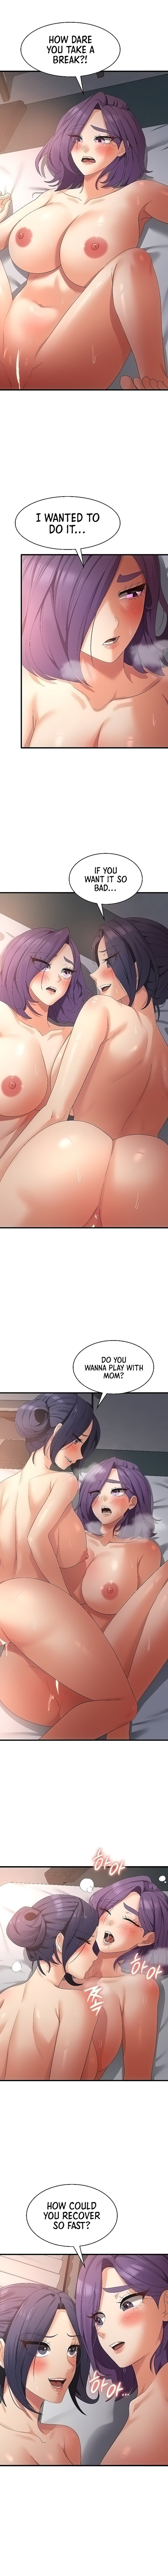 sexy-man-and-woman-chap-37-8